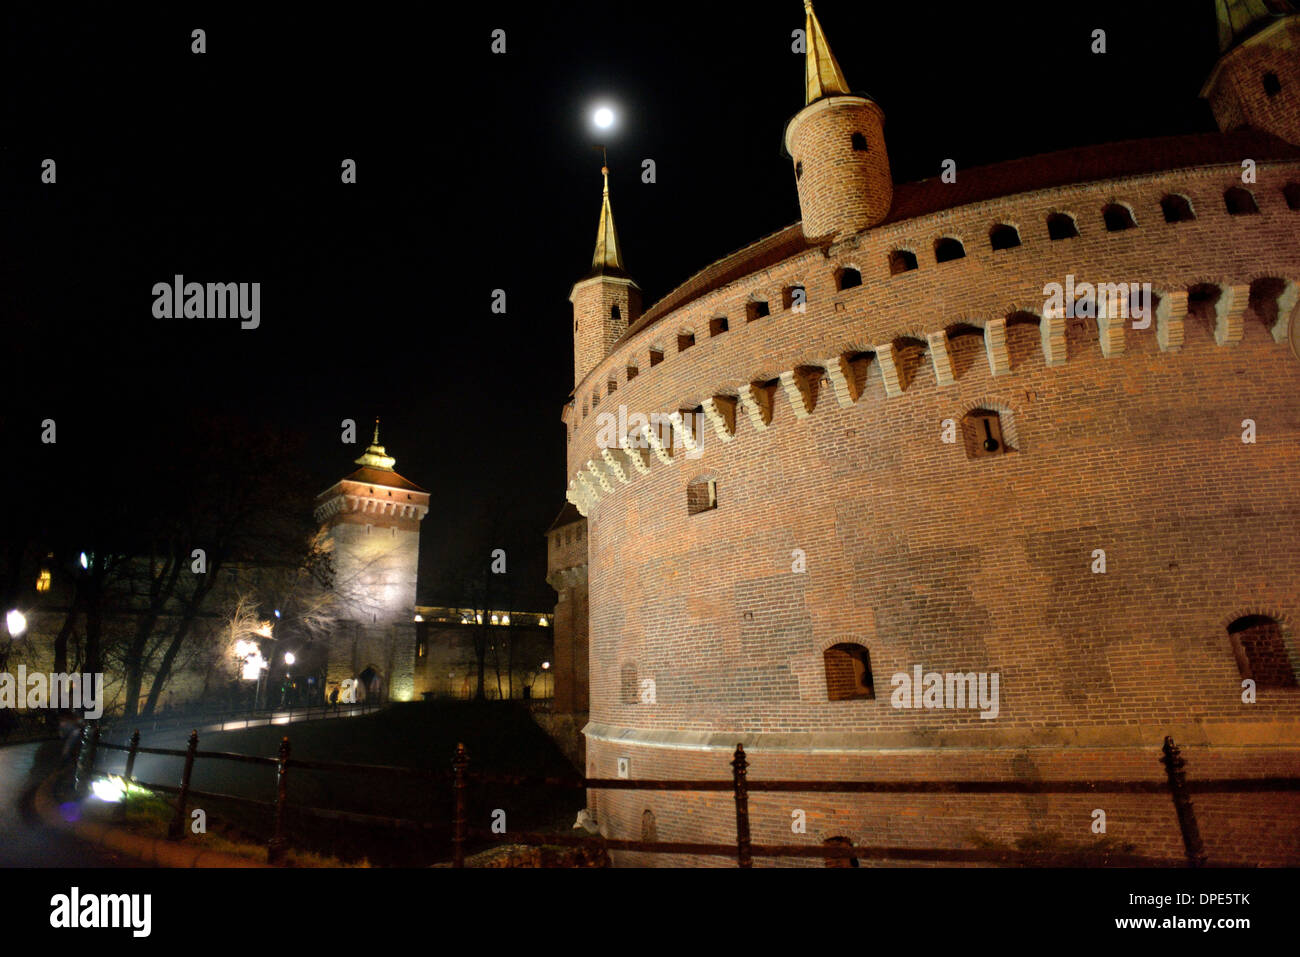 Kraków (Cracow),  Barbican and St. Florian's Gate night view. Stock Photo